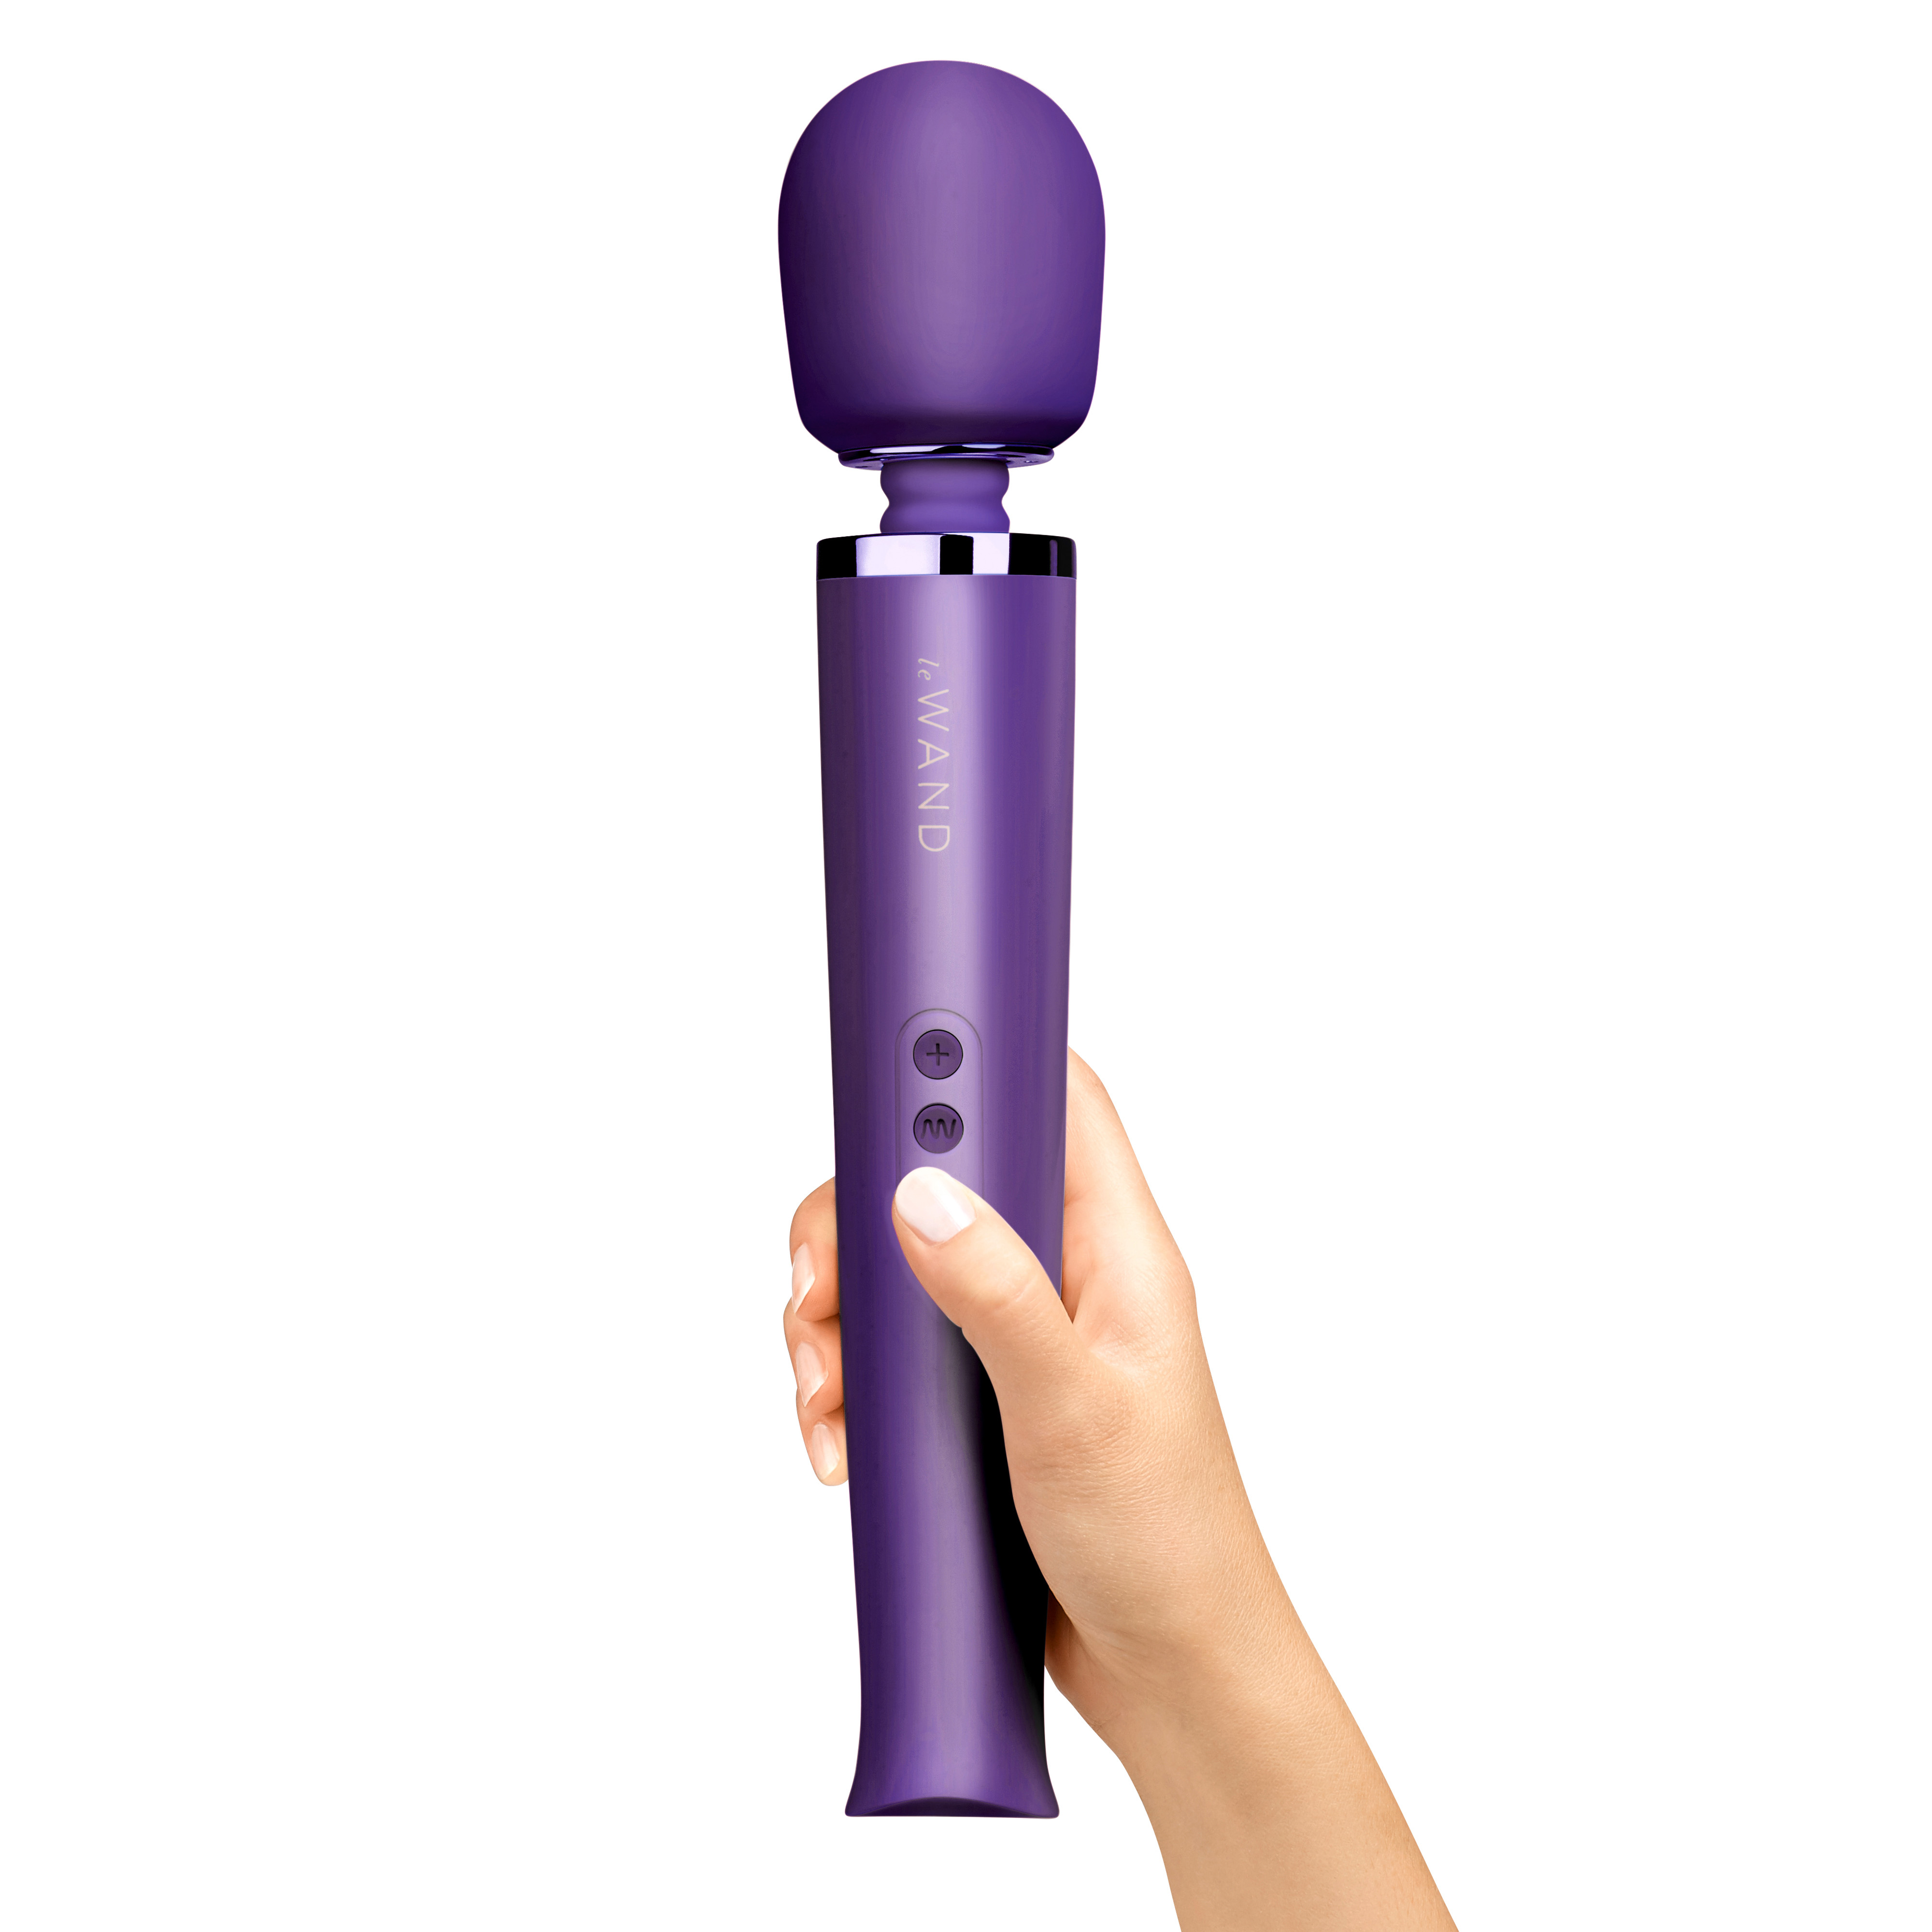 Le Wand Purple rechargeable massager